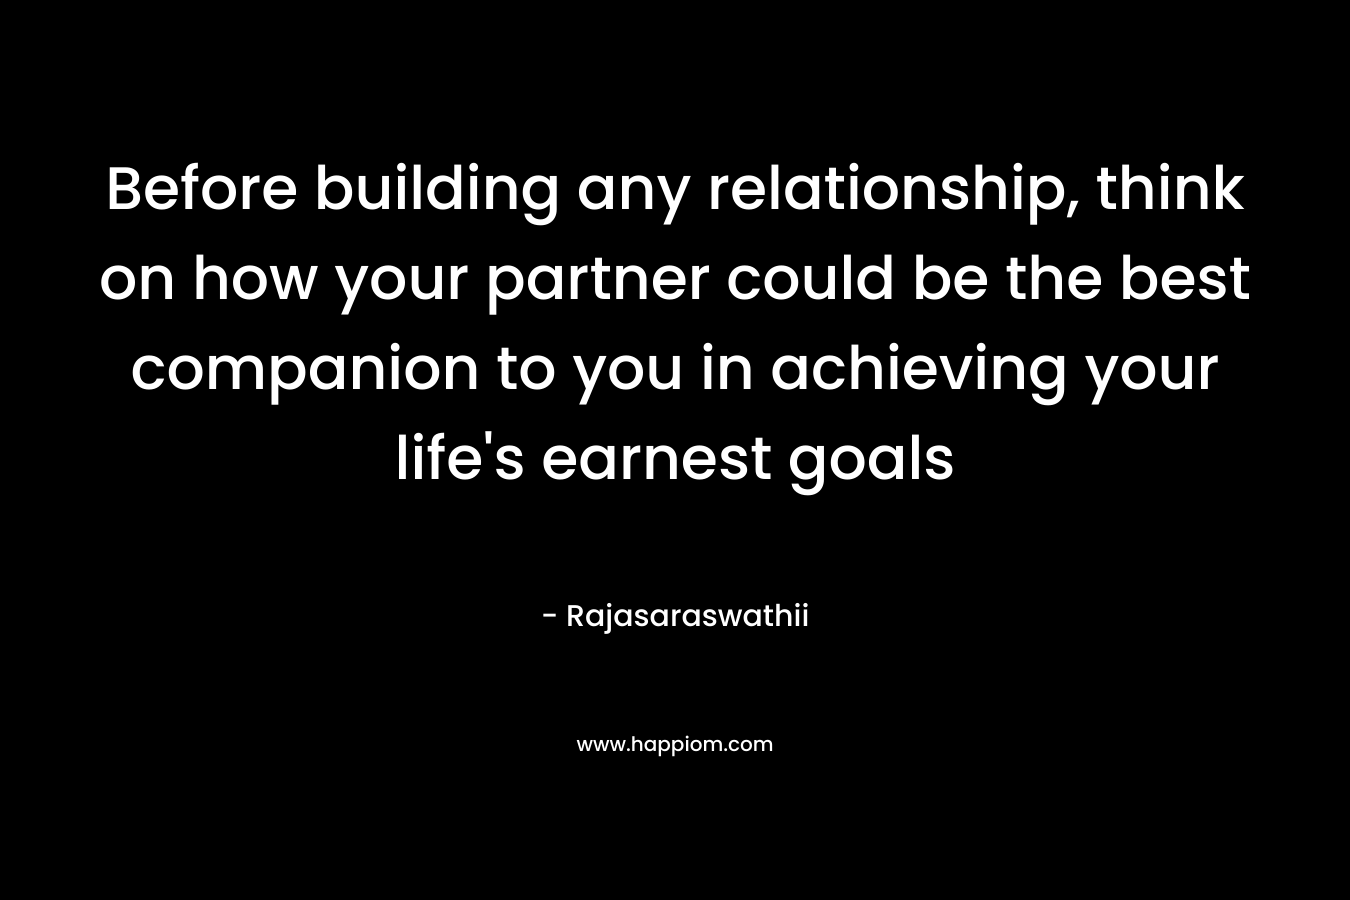 Before building any relationship, think on how your partner could be the best companion to you in achieving your life’s earnest goals – Rajasaraswathii